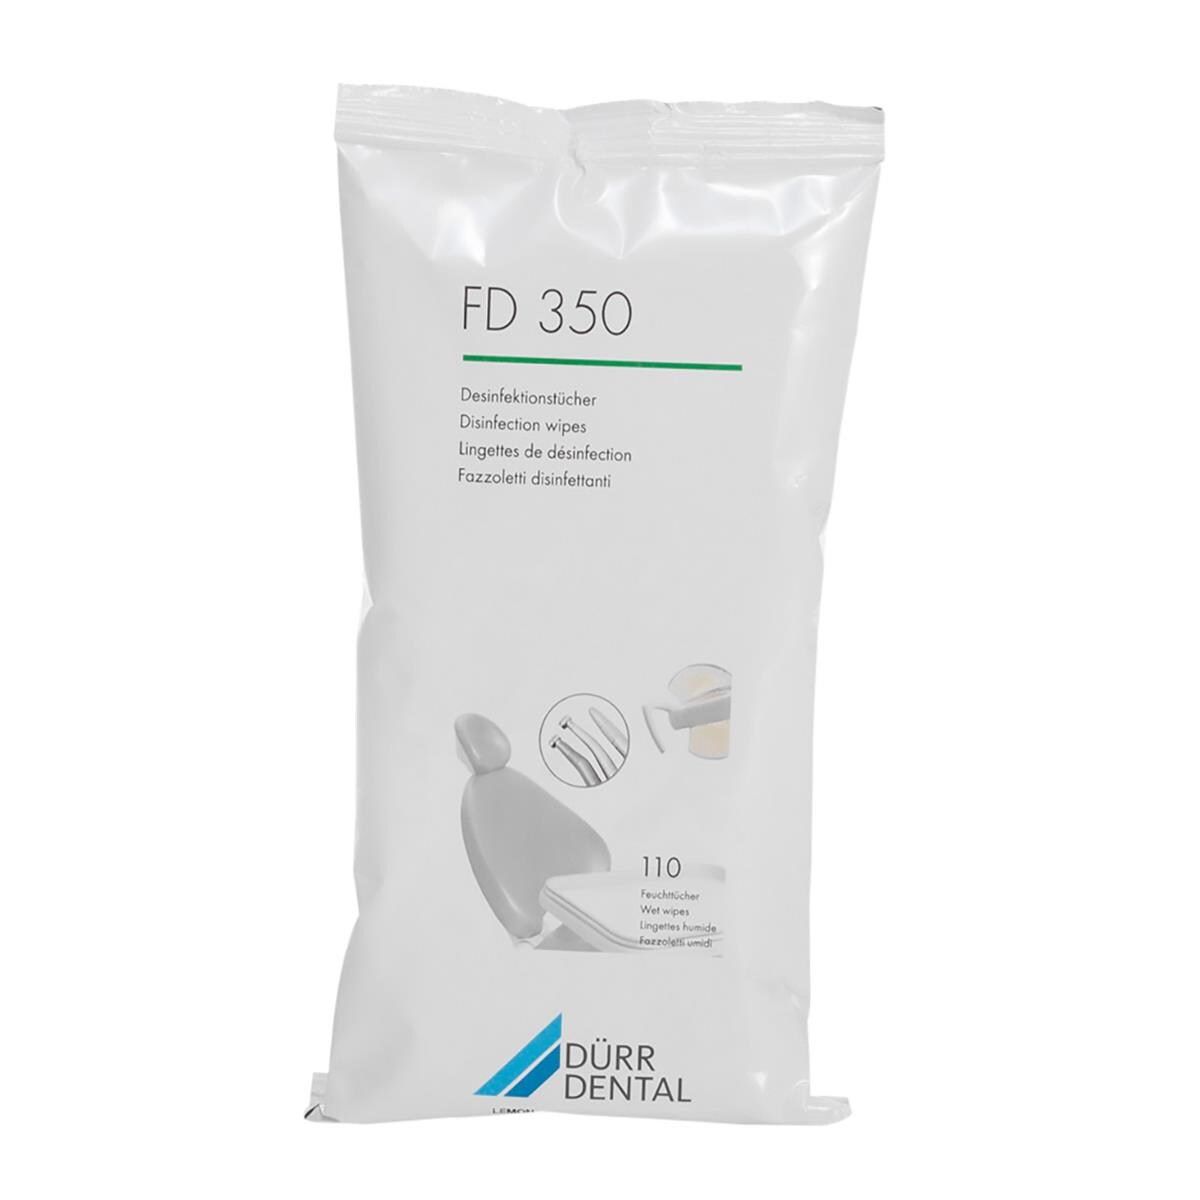 FD 350 Disinfectant Wipes Refill 110pk